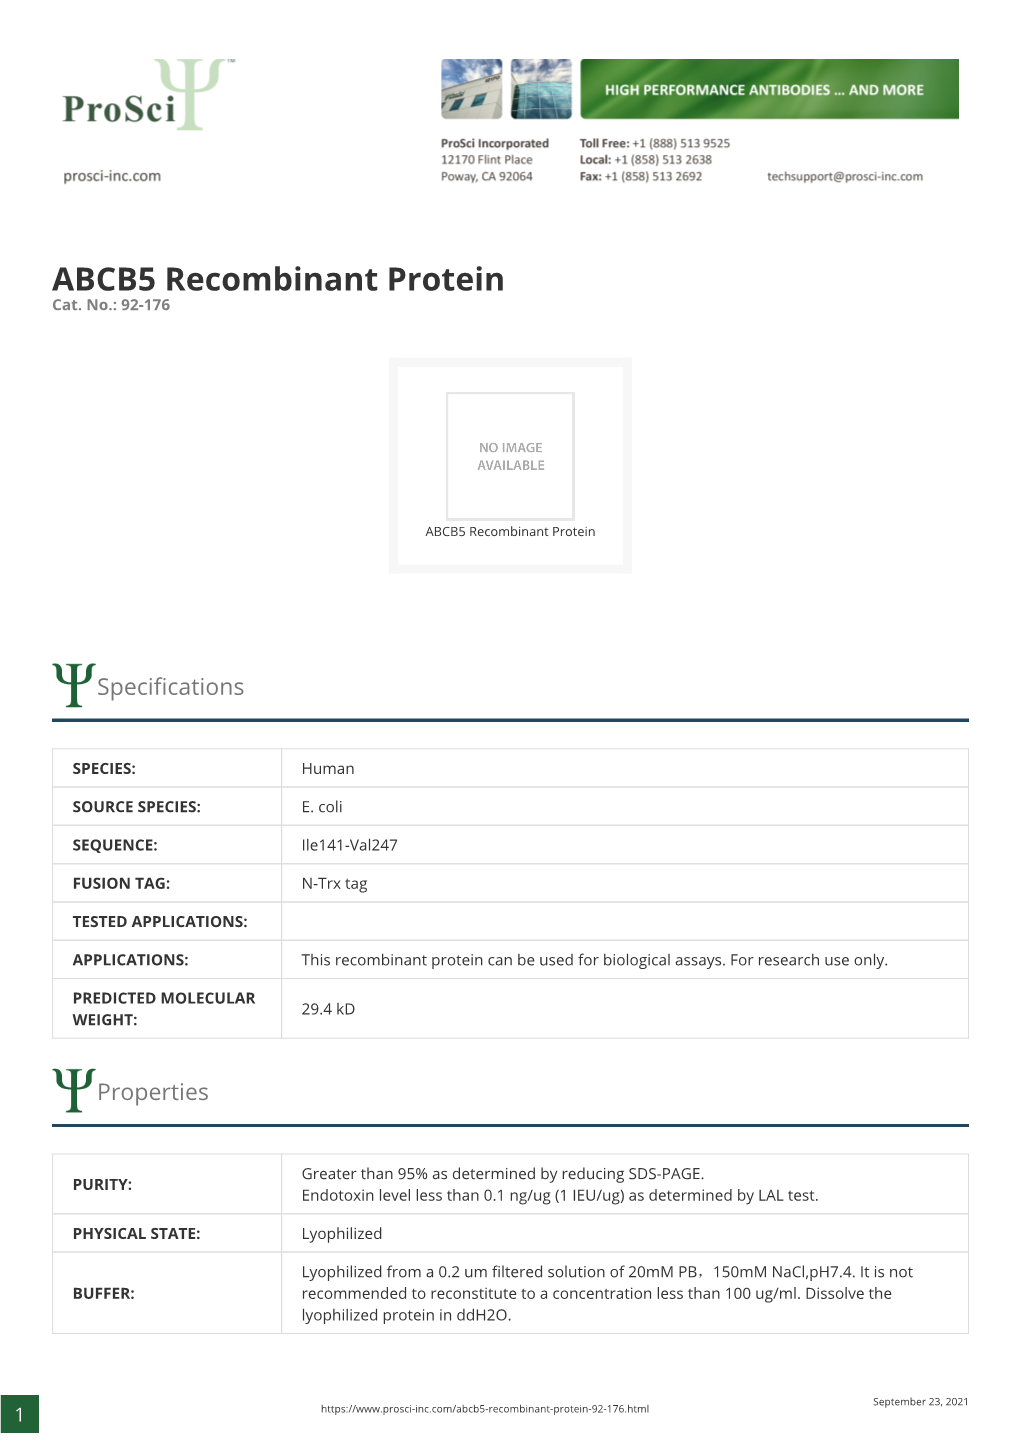 ABCB5 Recombinant Protein Cat